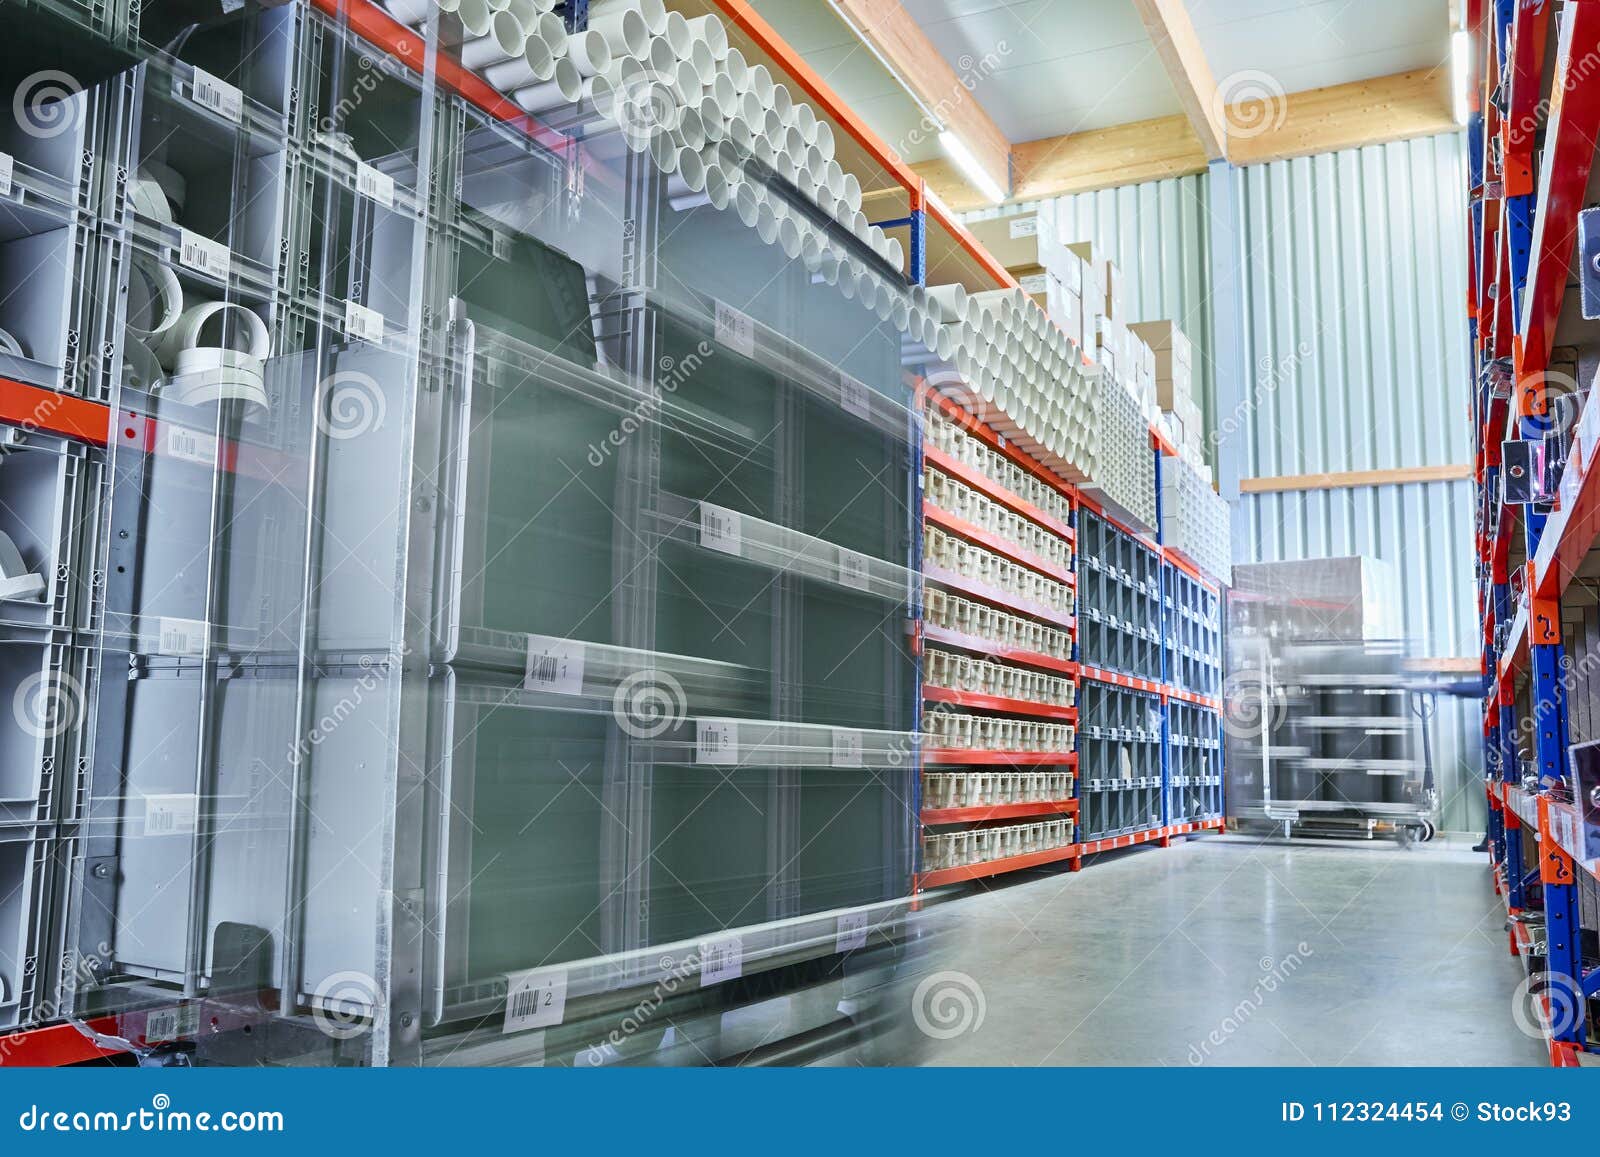 bright modern warehouse storage with workers commissioning in motion bluer